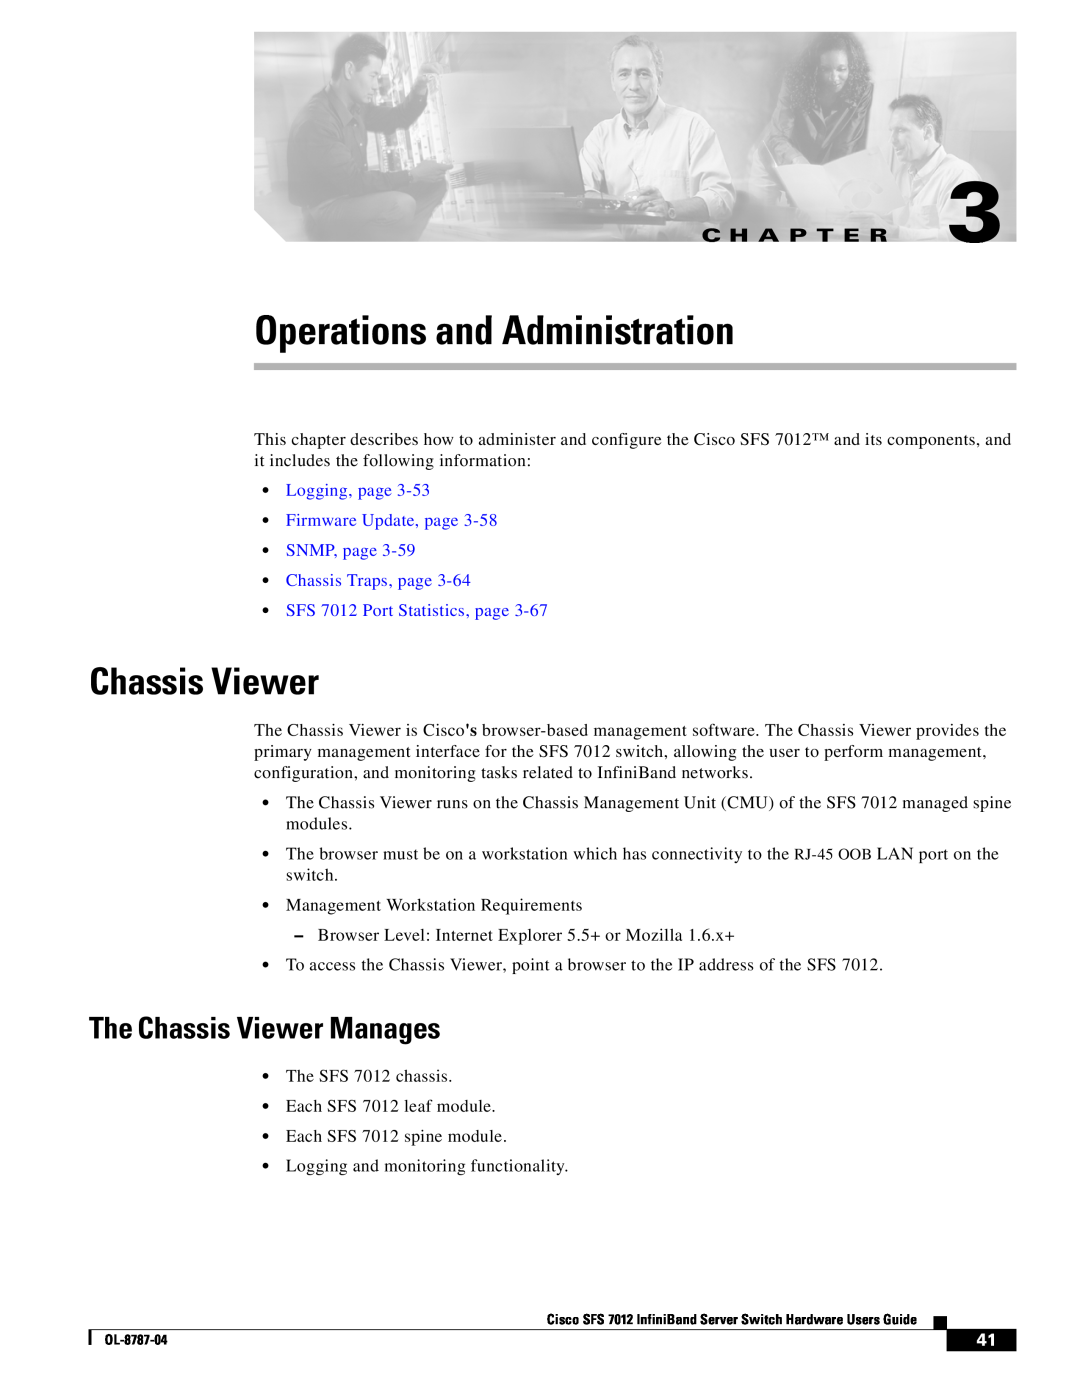 Cisco Systems SFS 7012 manual Operations and Administration, The Chassis Viewer Manages, C H A P T E R 